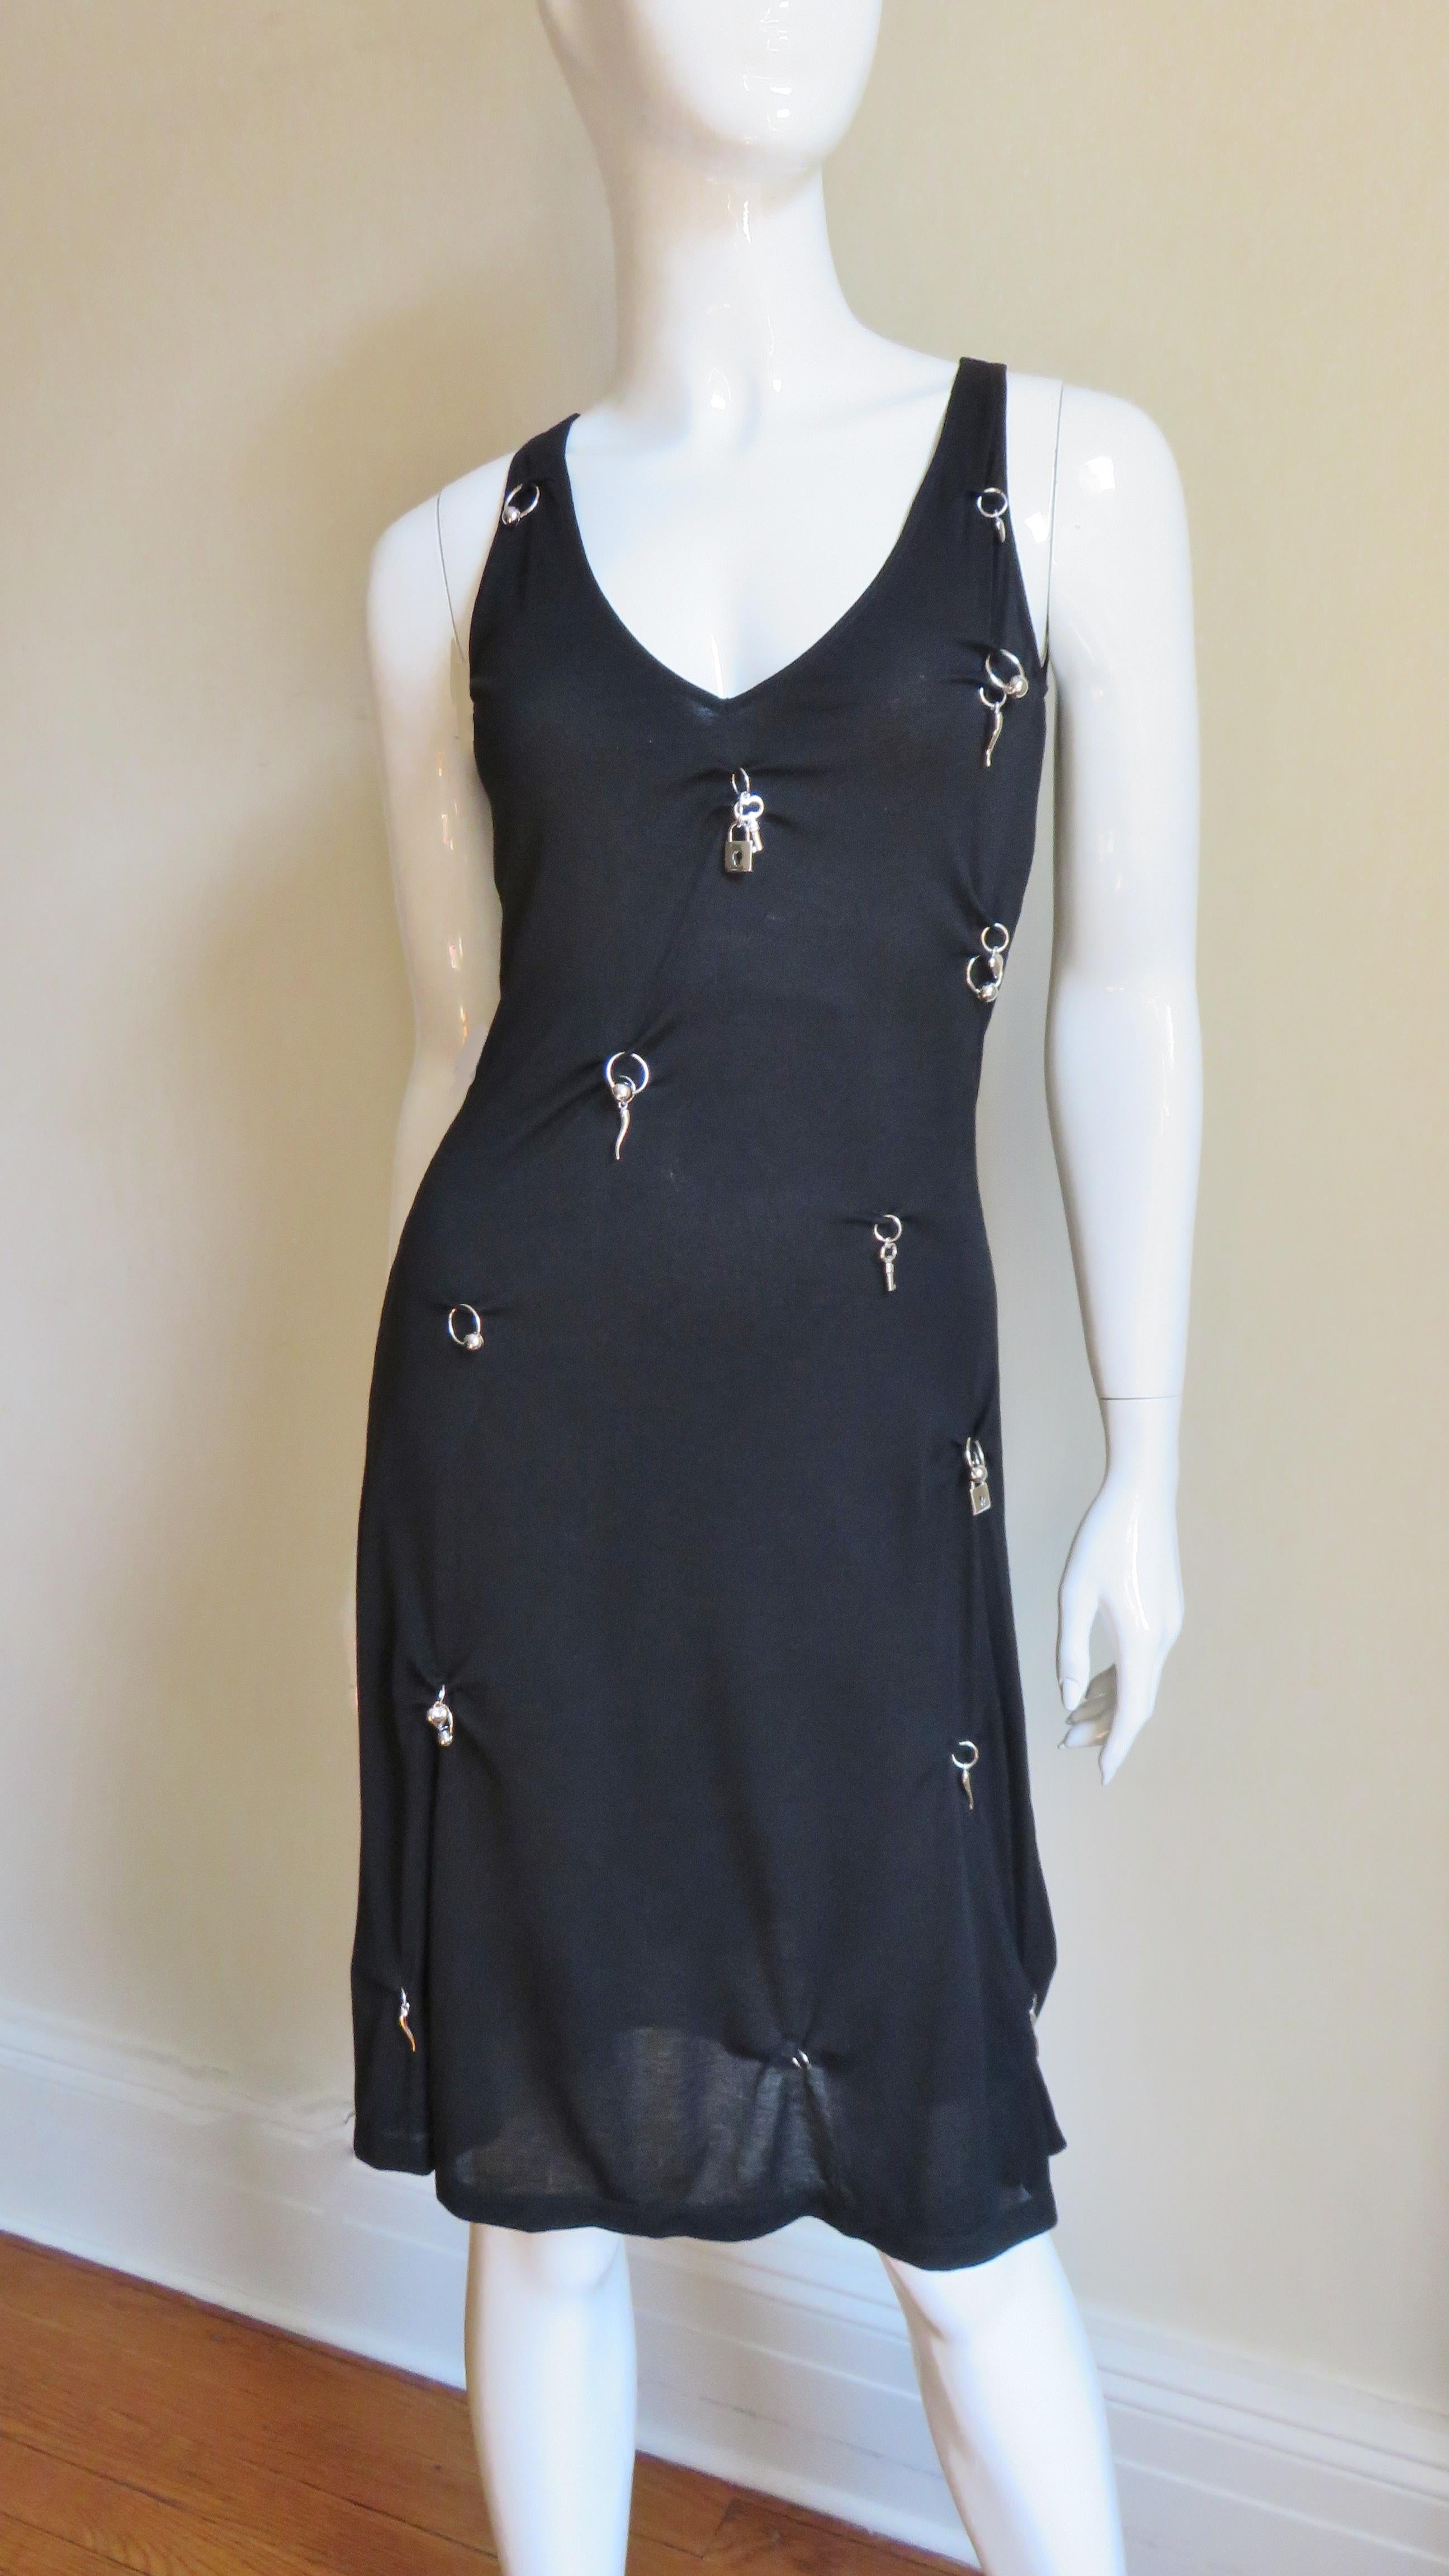 Black Moschino Dress with Metal Lock and Key Charms 